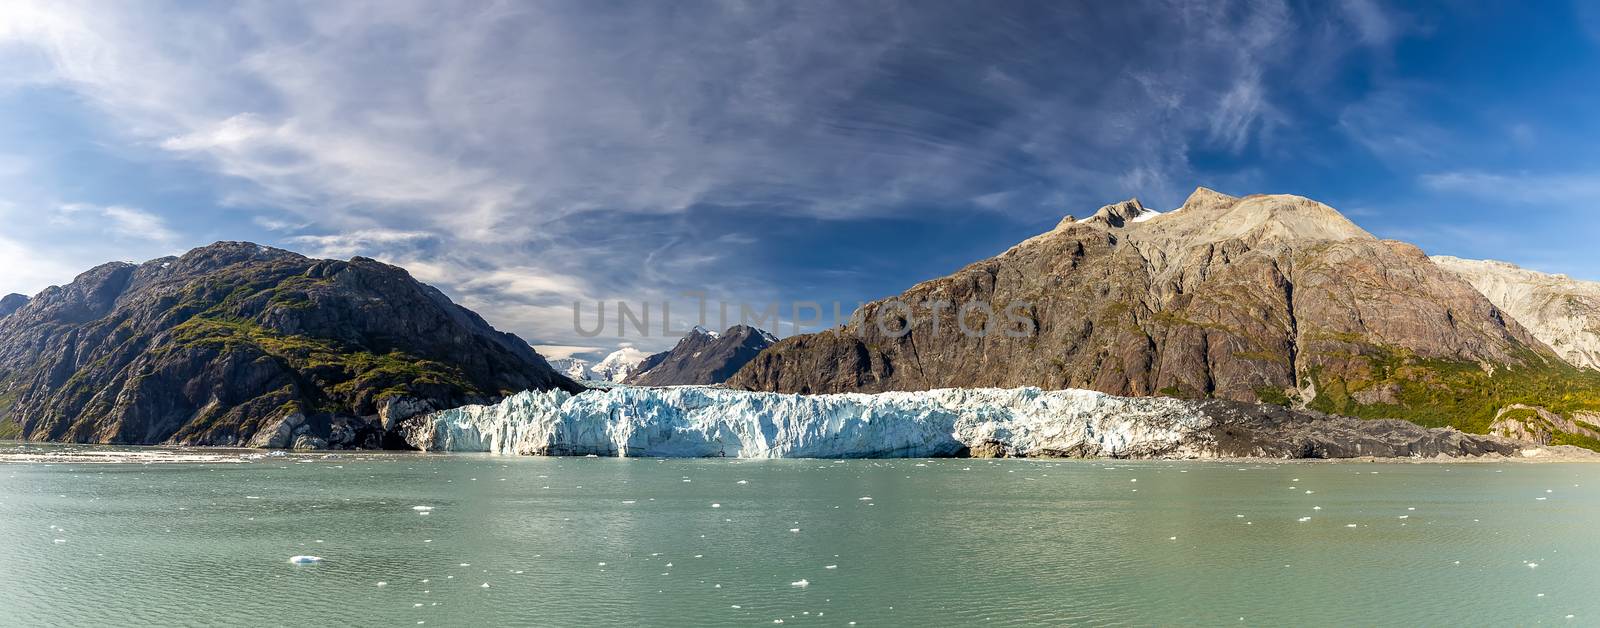 Panoramic view of Margerie glacier surrounded by huge mountains in Glacier Bay National Park and Preserve, Alaska, United States. Snowy mountain peaks and cloudy blue sky in the background.